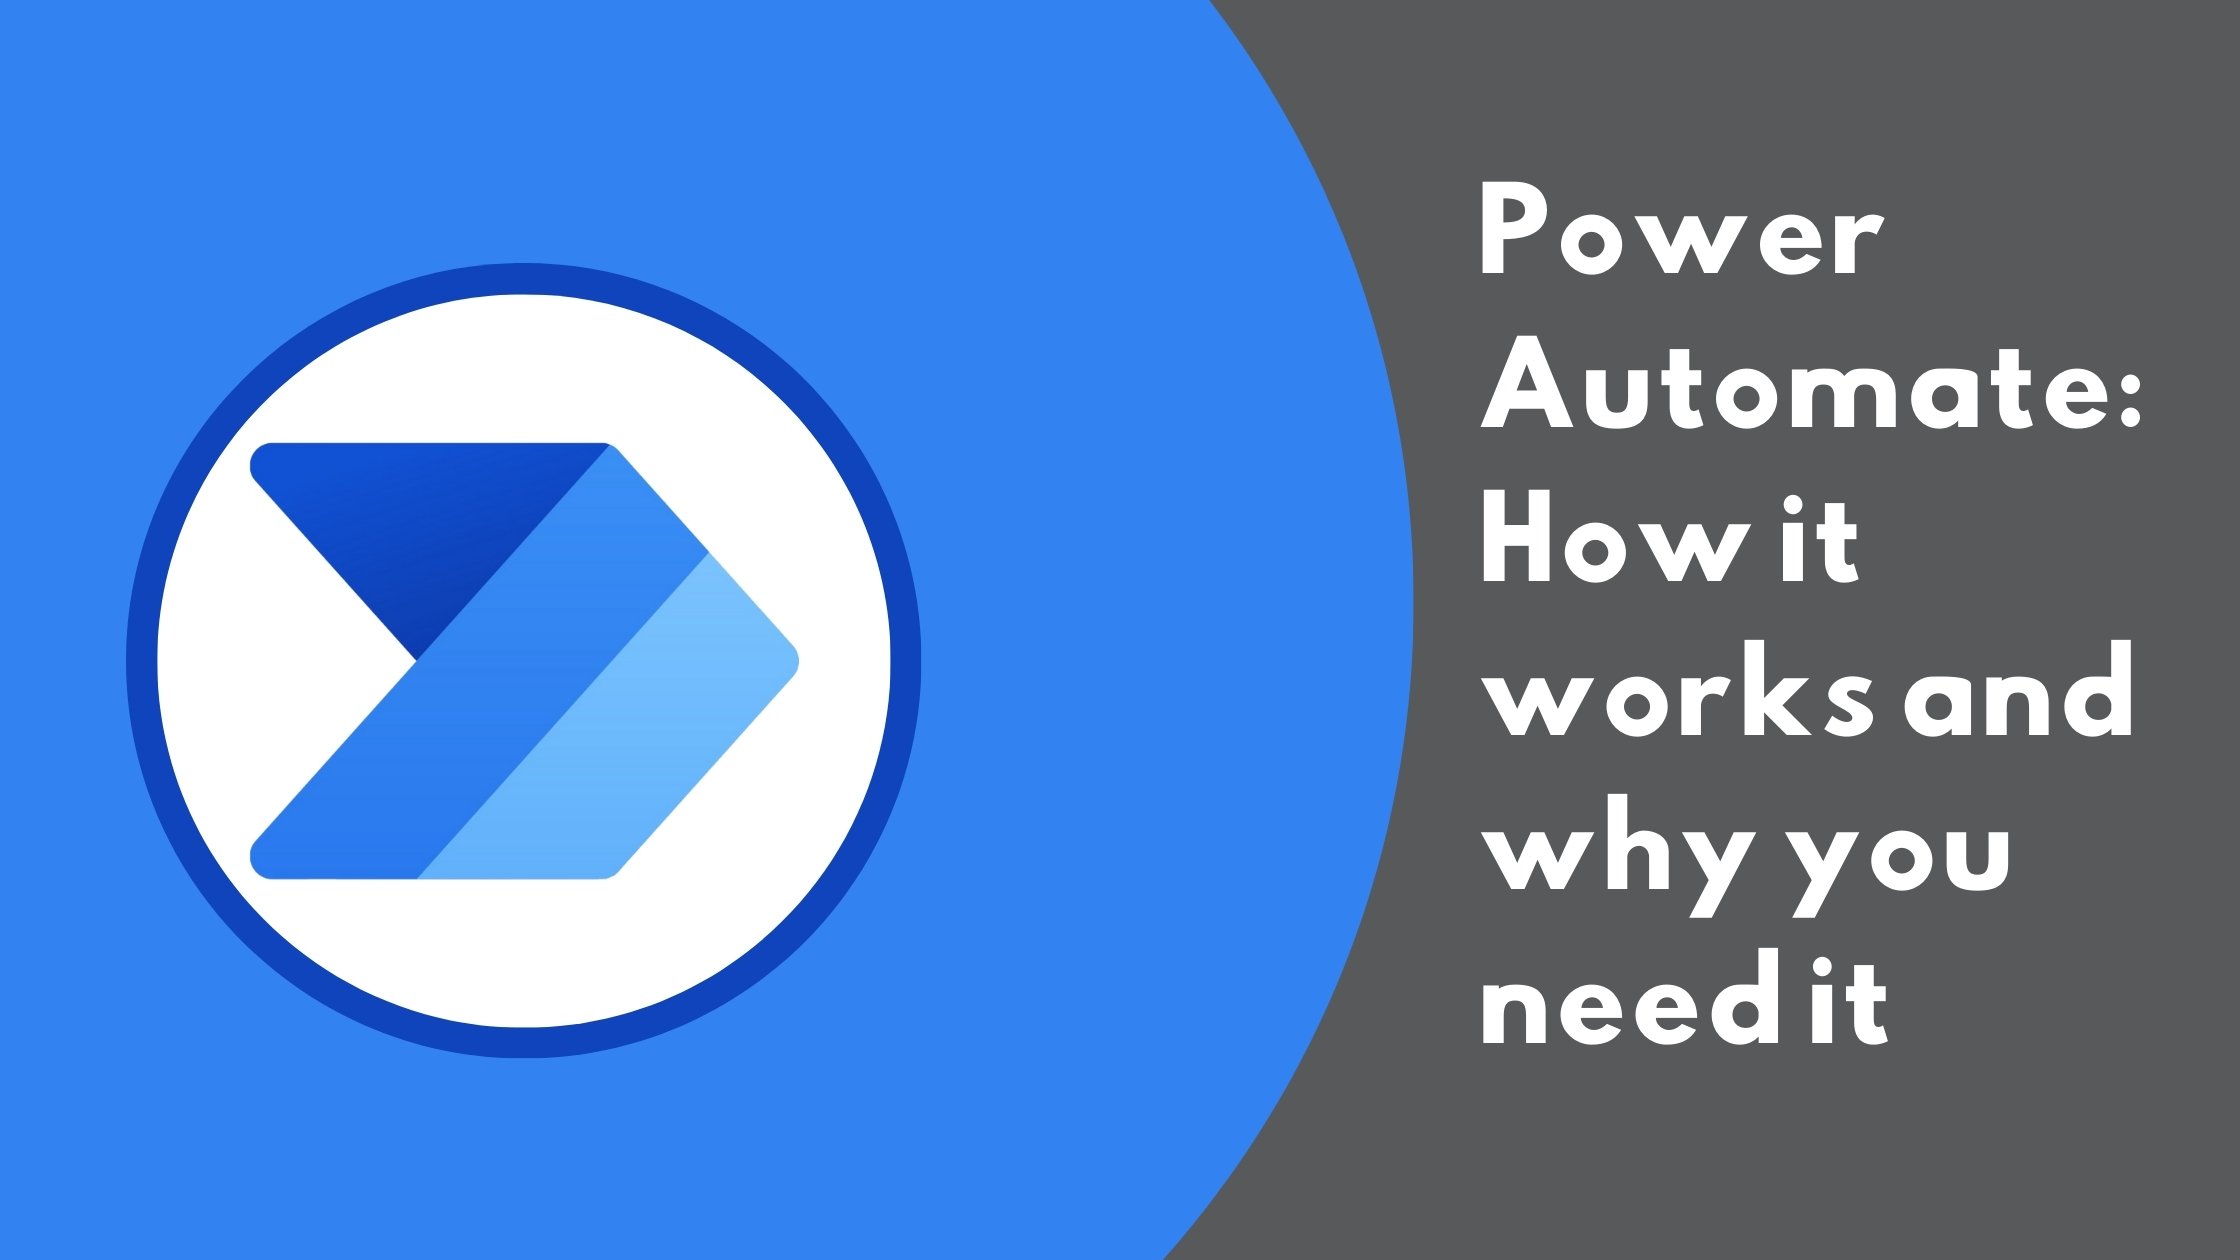 Power Automate: What is it?